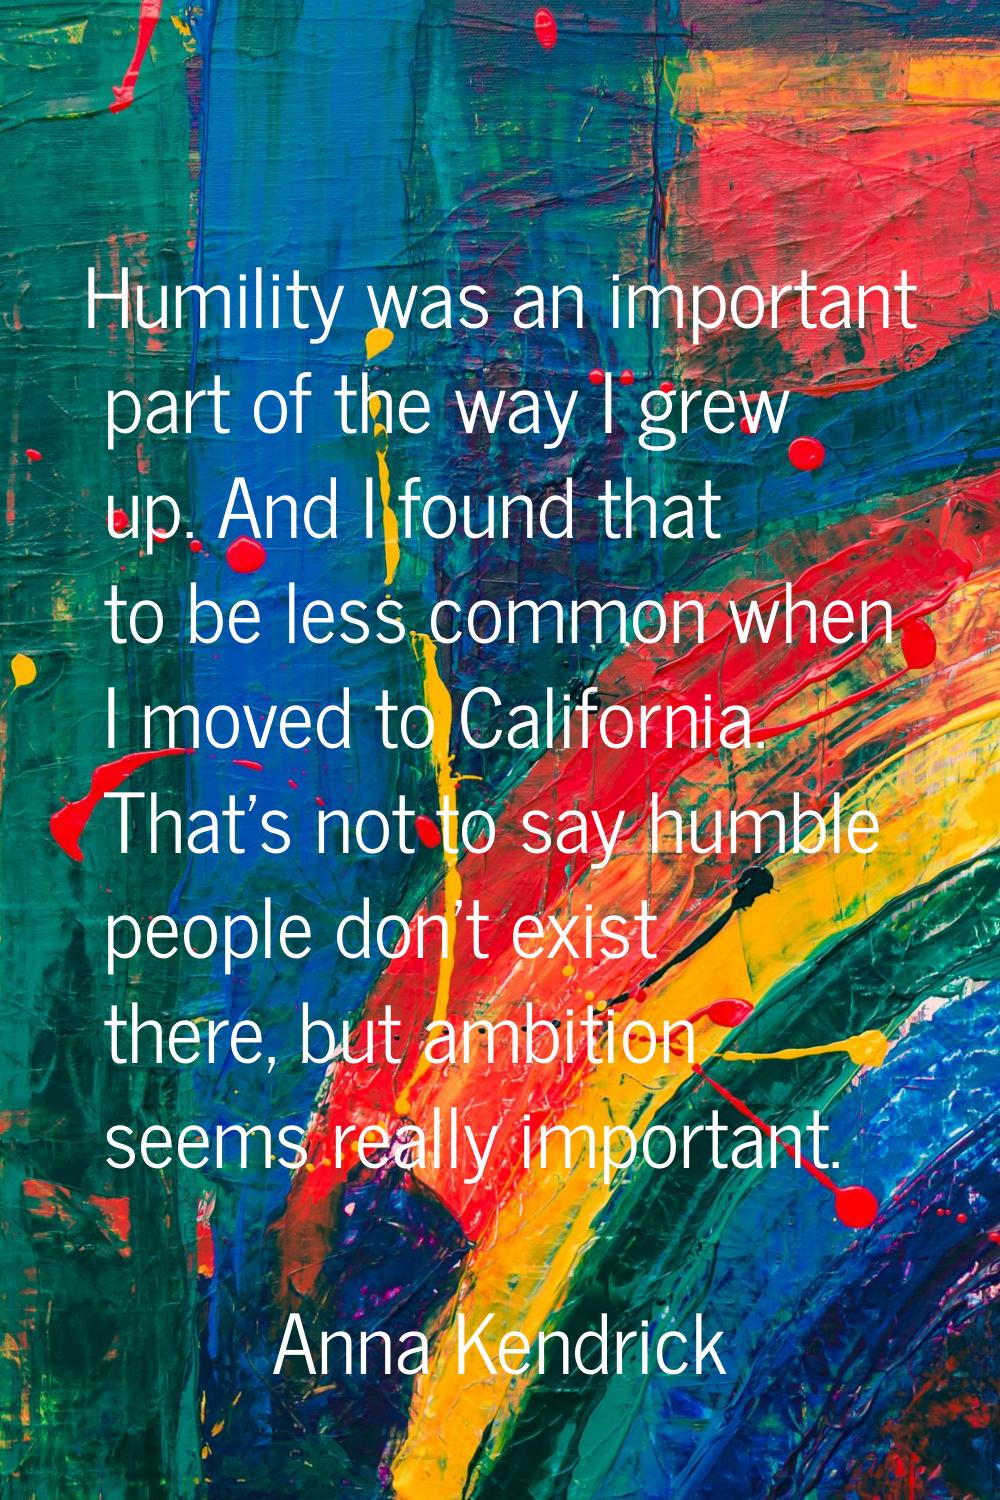 Humility was an important part of the way I grew up. And I found that to be less common when I move